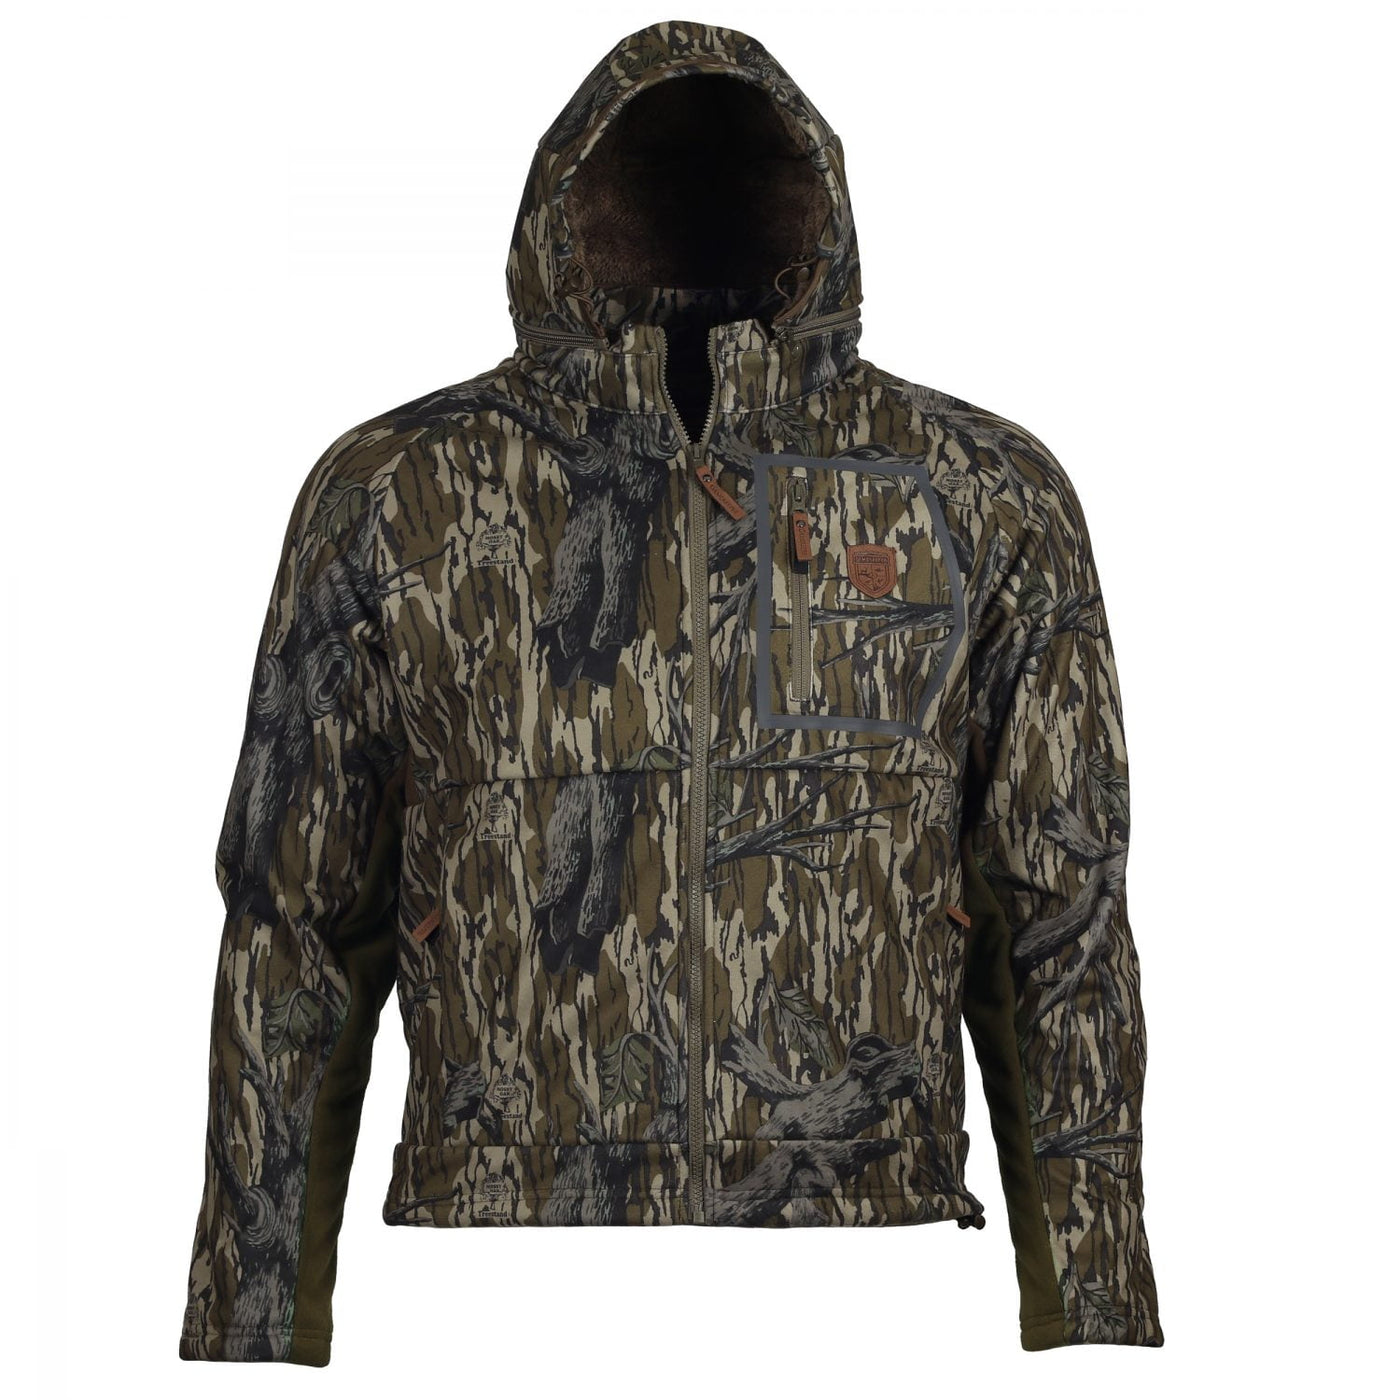 Gamekeeper Harvester Jacket-CAMO CLOTHING-Tree Stand-2XL-Kevin's Fine Outdoor Gear & Apparel